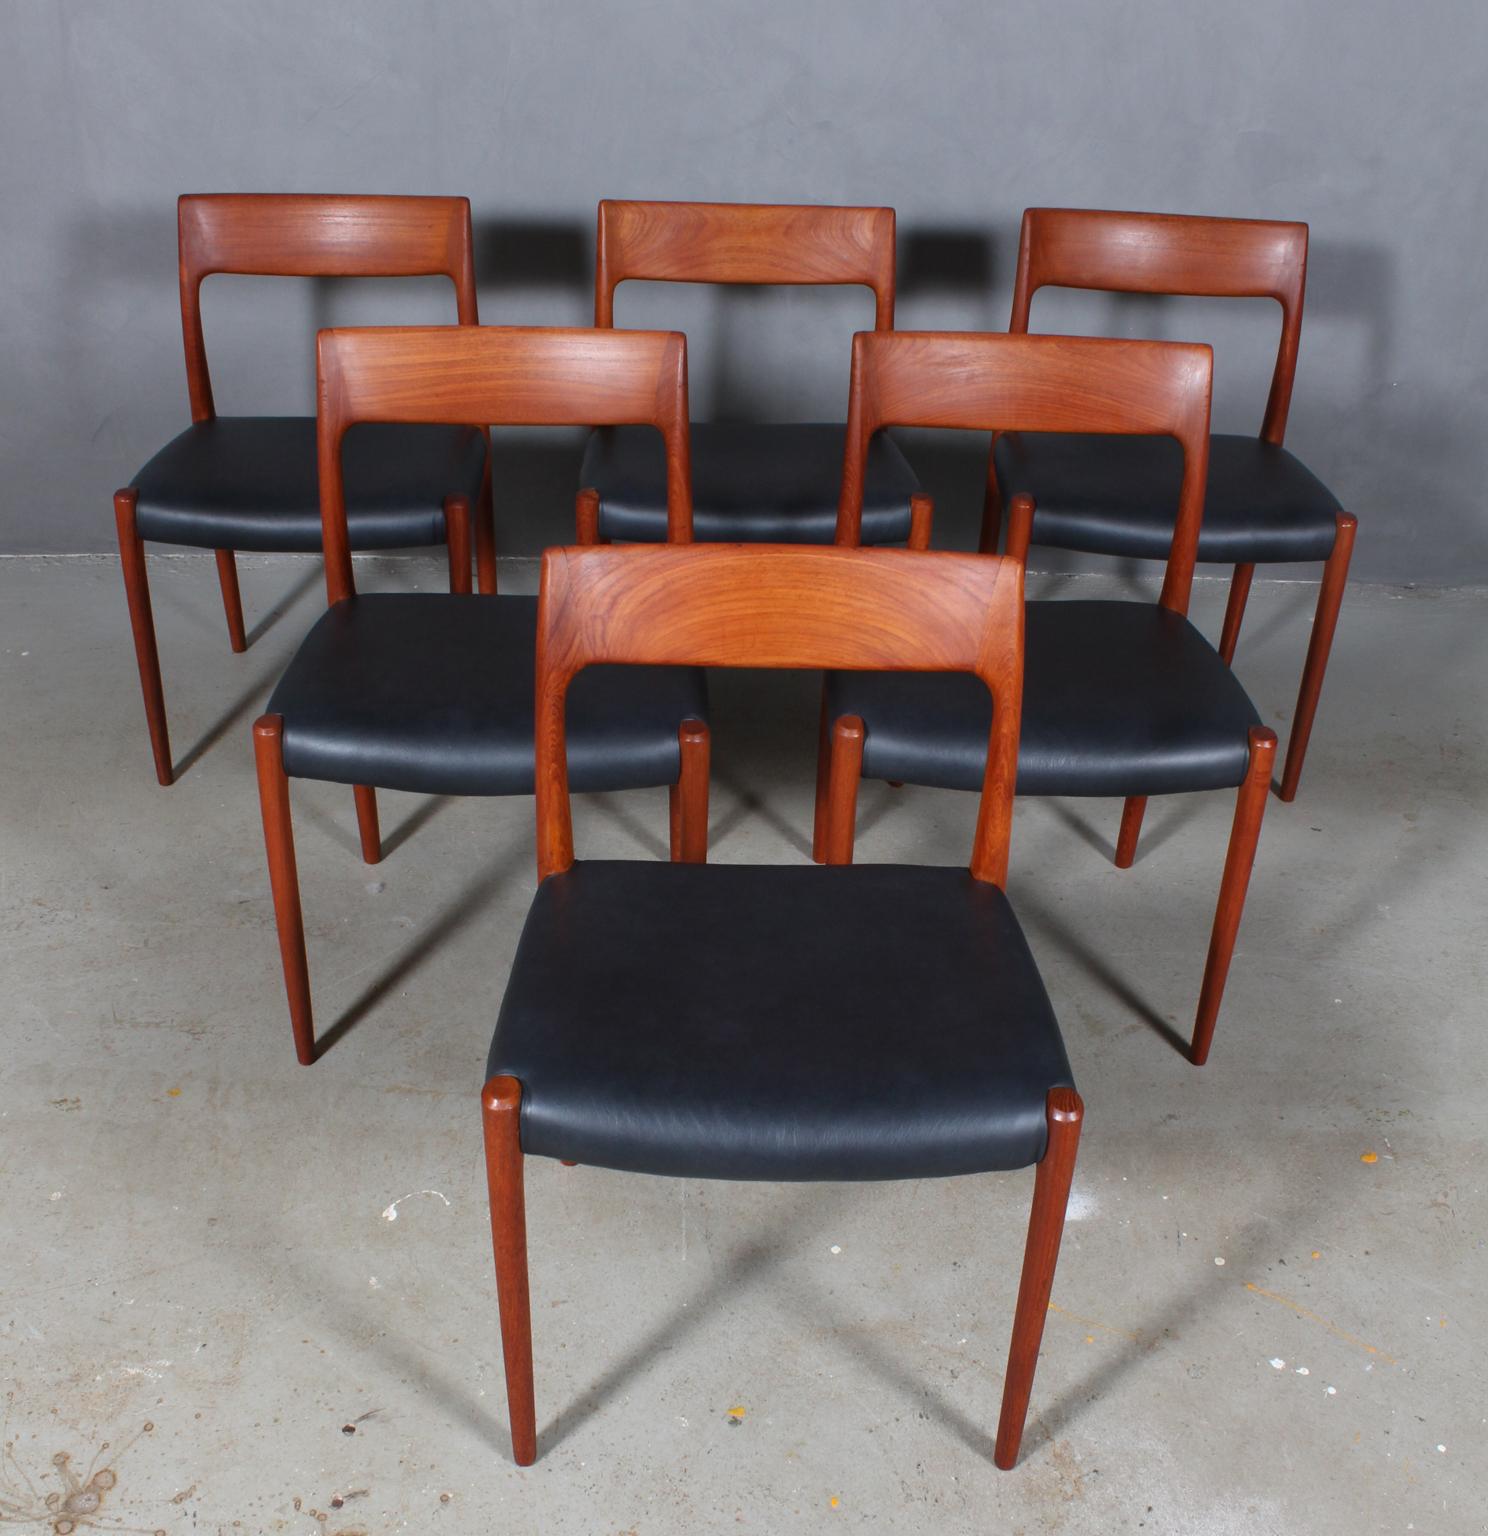 Set of six N. O. Møller dining chairs with frame of solid teak.

Seats new upholstered with black aniline leather

Model 77, made by J. L. Møller, Denmark, 1960s.